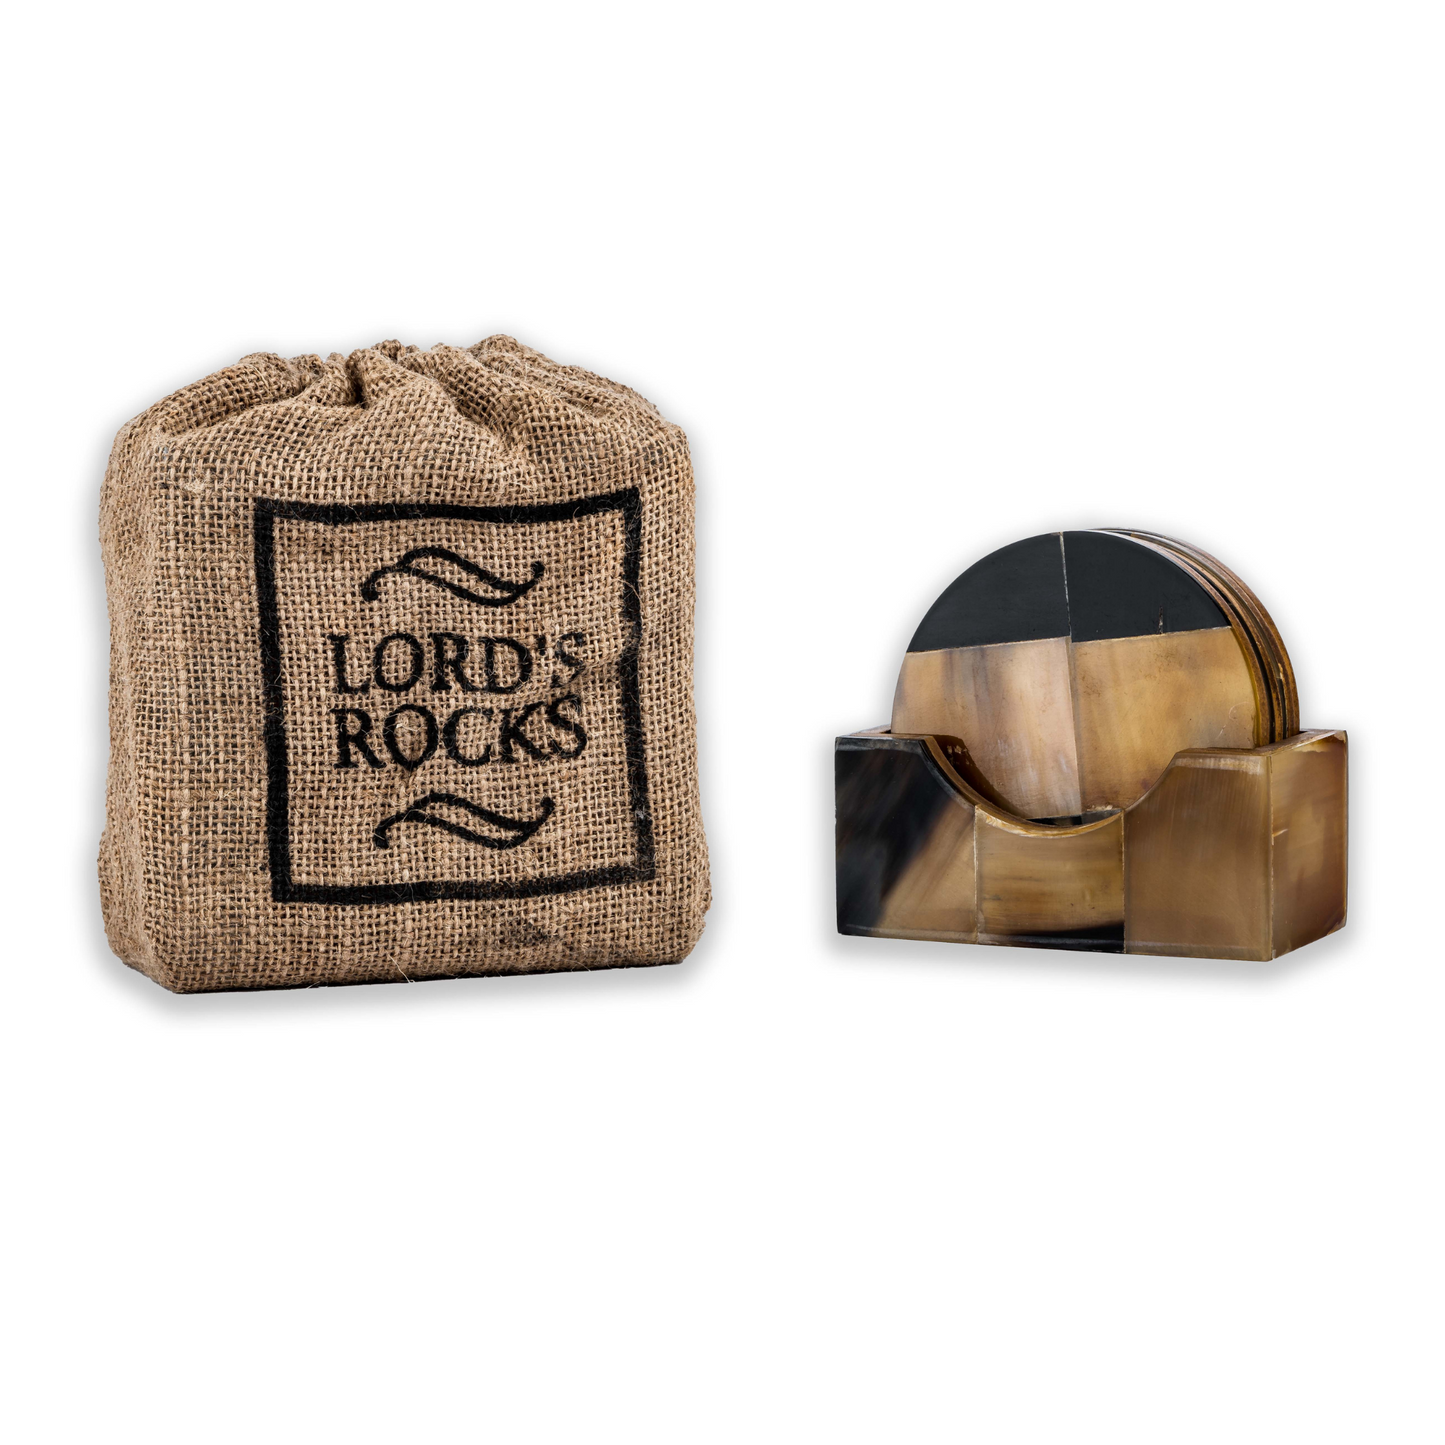 Viking Horn Drink Coasters with Holder by Lord’s Rocks | 4 Piece Round Coaster Set with Reusable Bag | 4-Inch Coasters for Coffee Table and Unique Gifts for Men